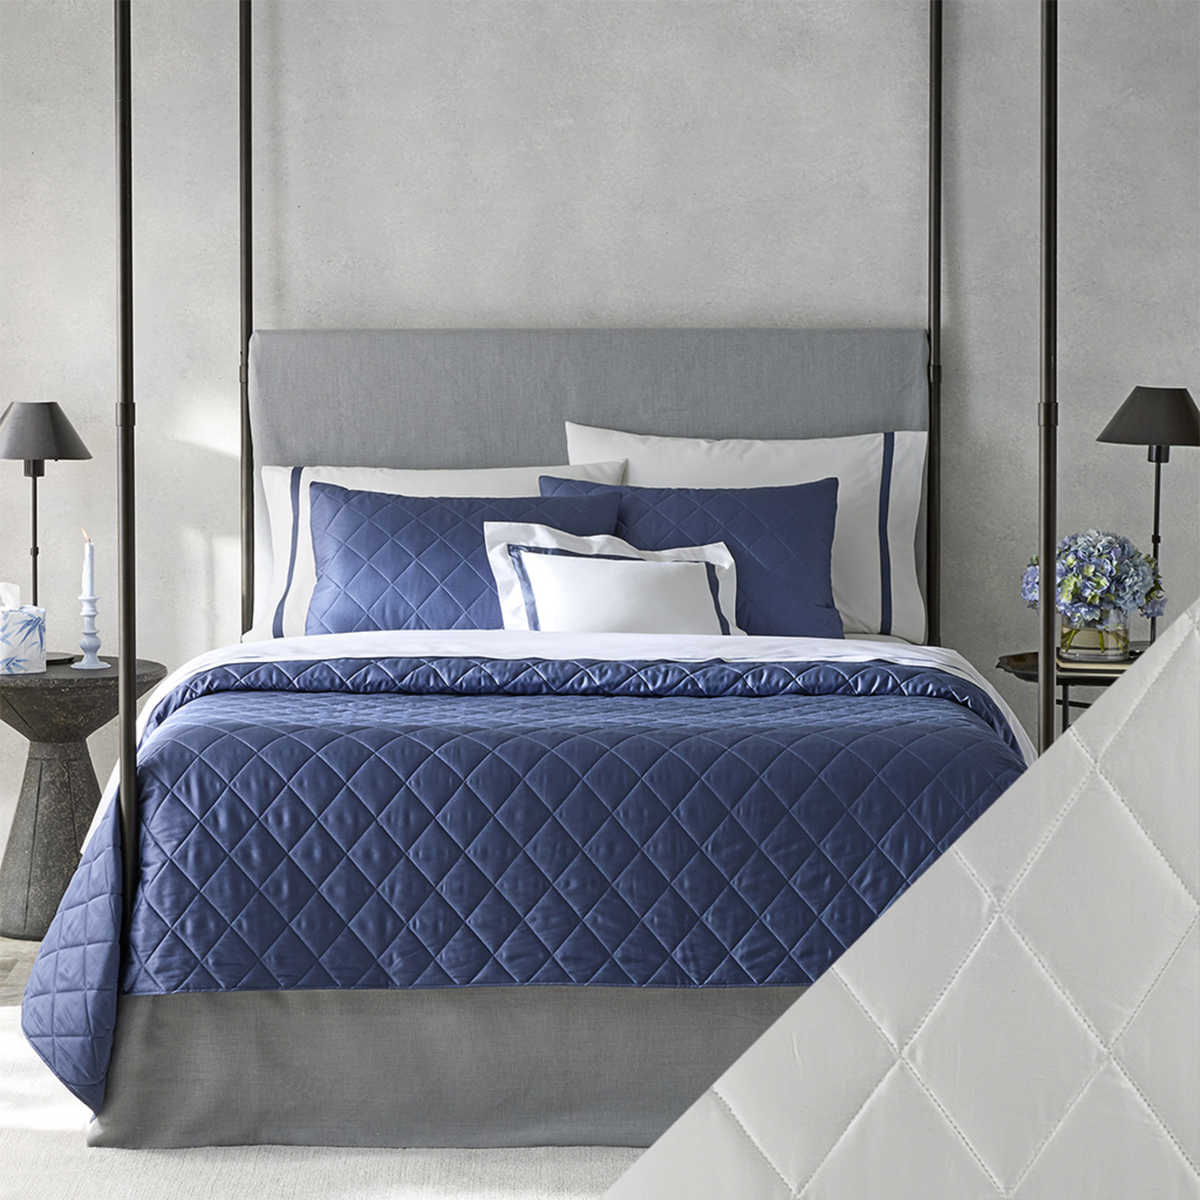 Matouk Nocturne Bedding Main Image with Swatch in Silver